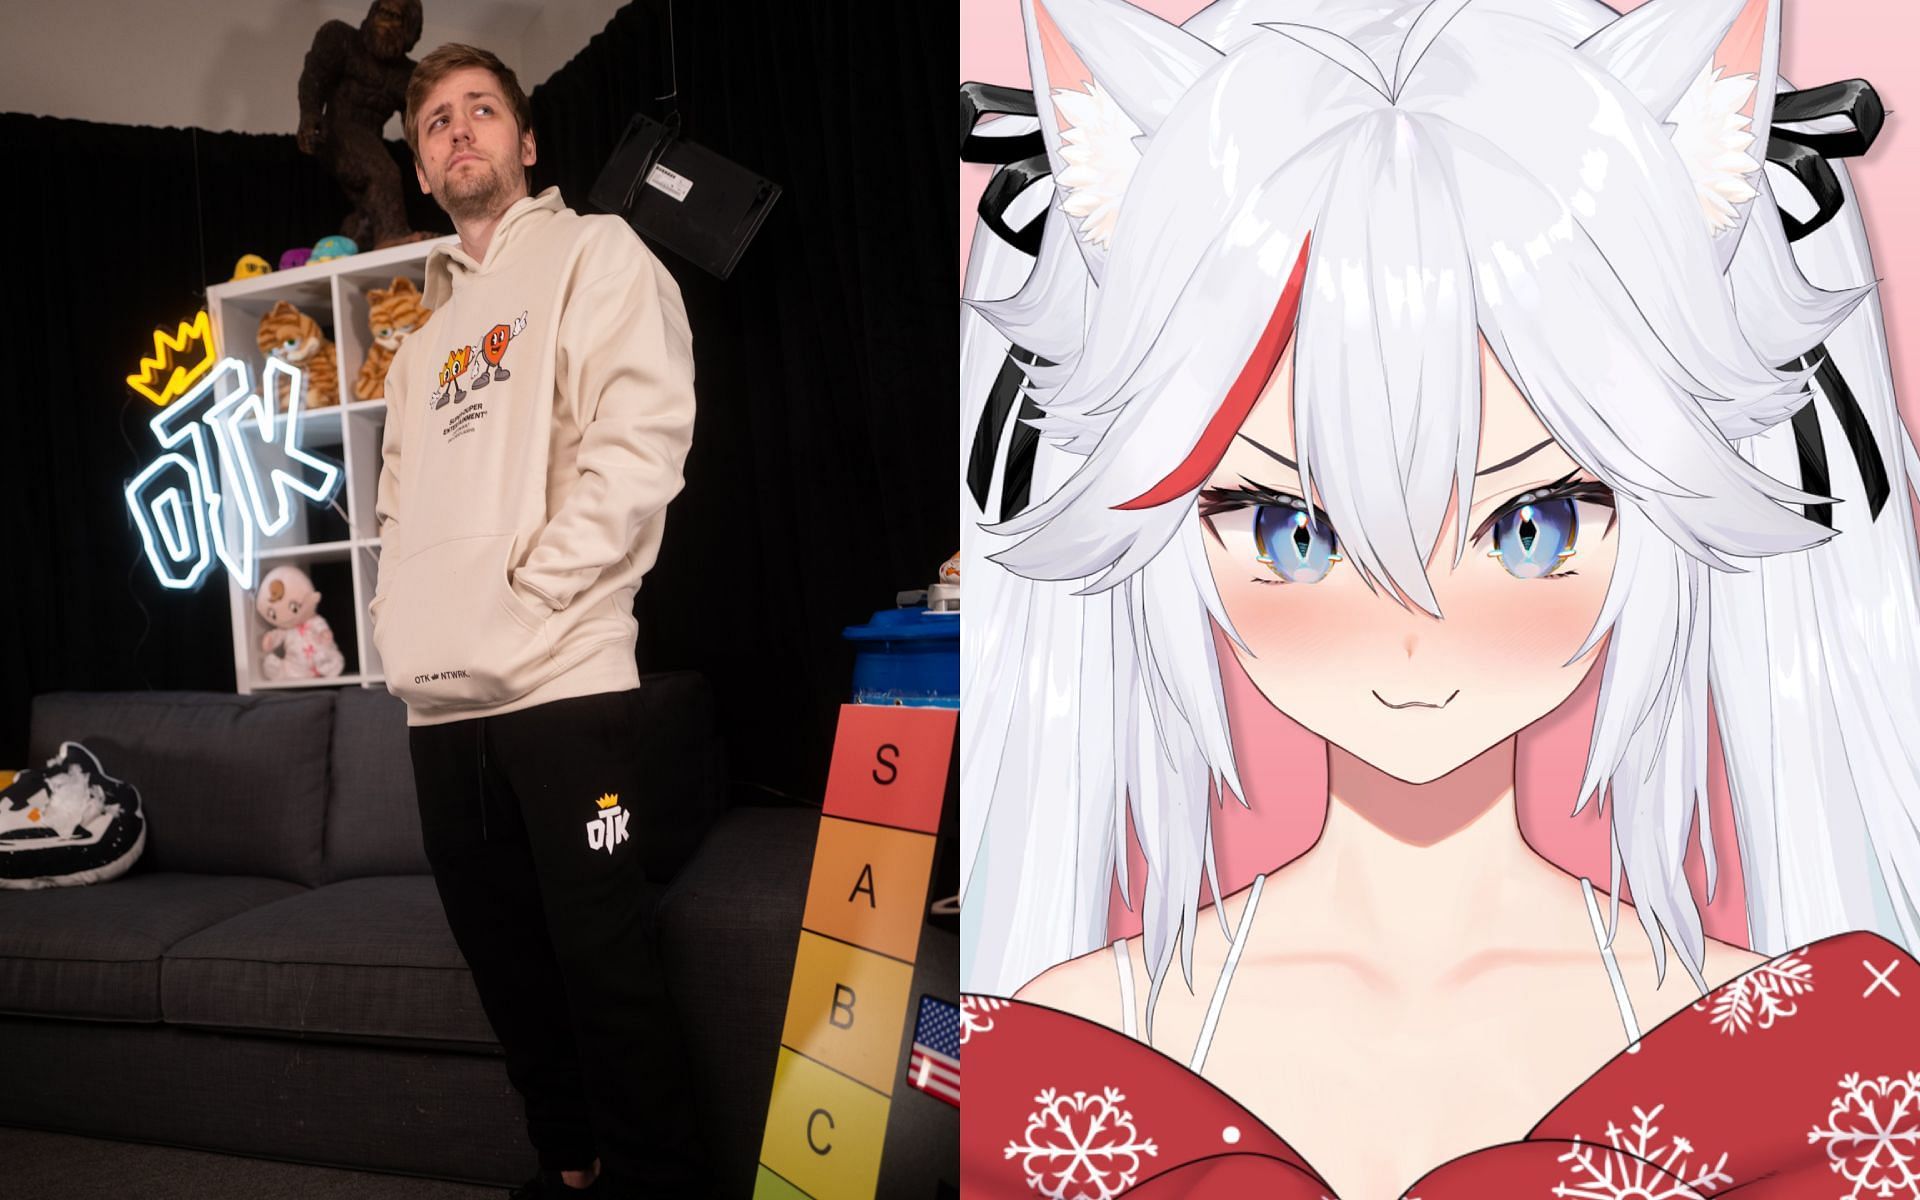 Sodapoppin announced that Veibae was moving in with him during a stream on January 22, 2023 (Images via Sodapoppin and Veibae/Twitter)